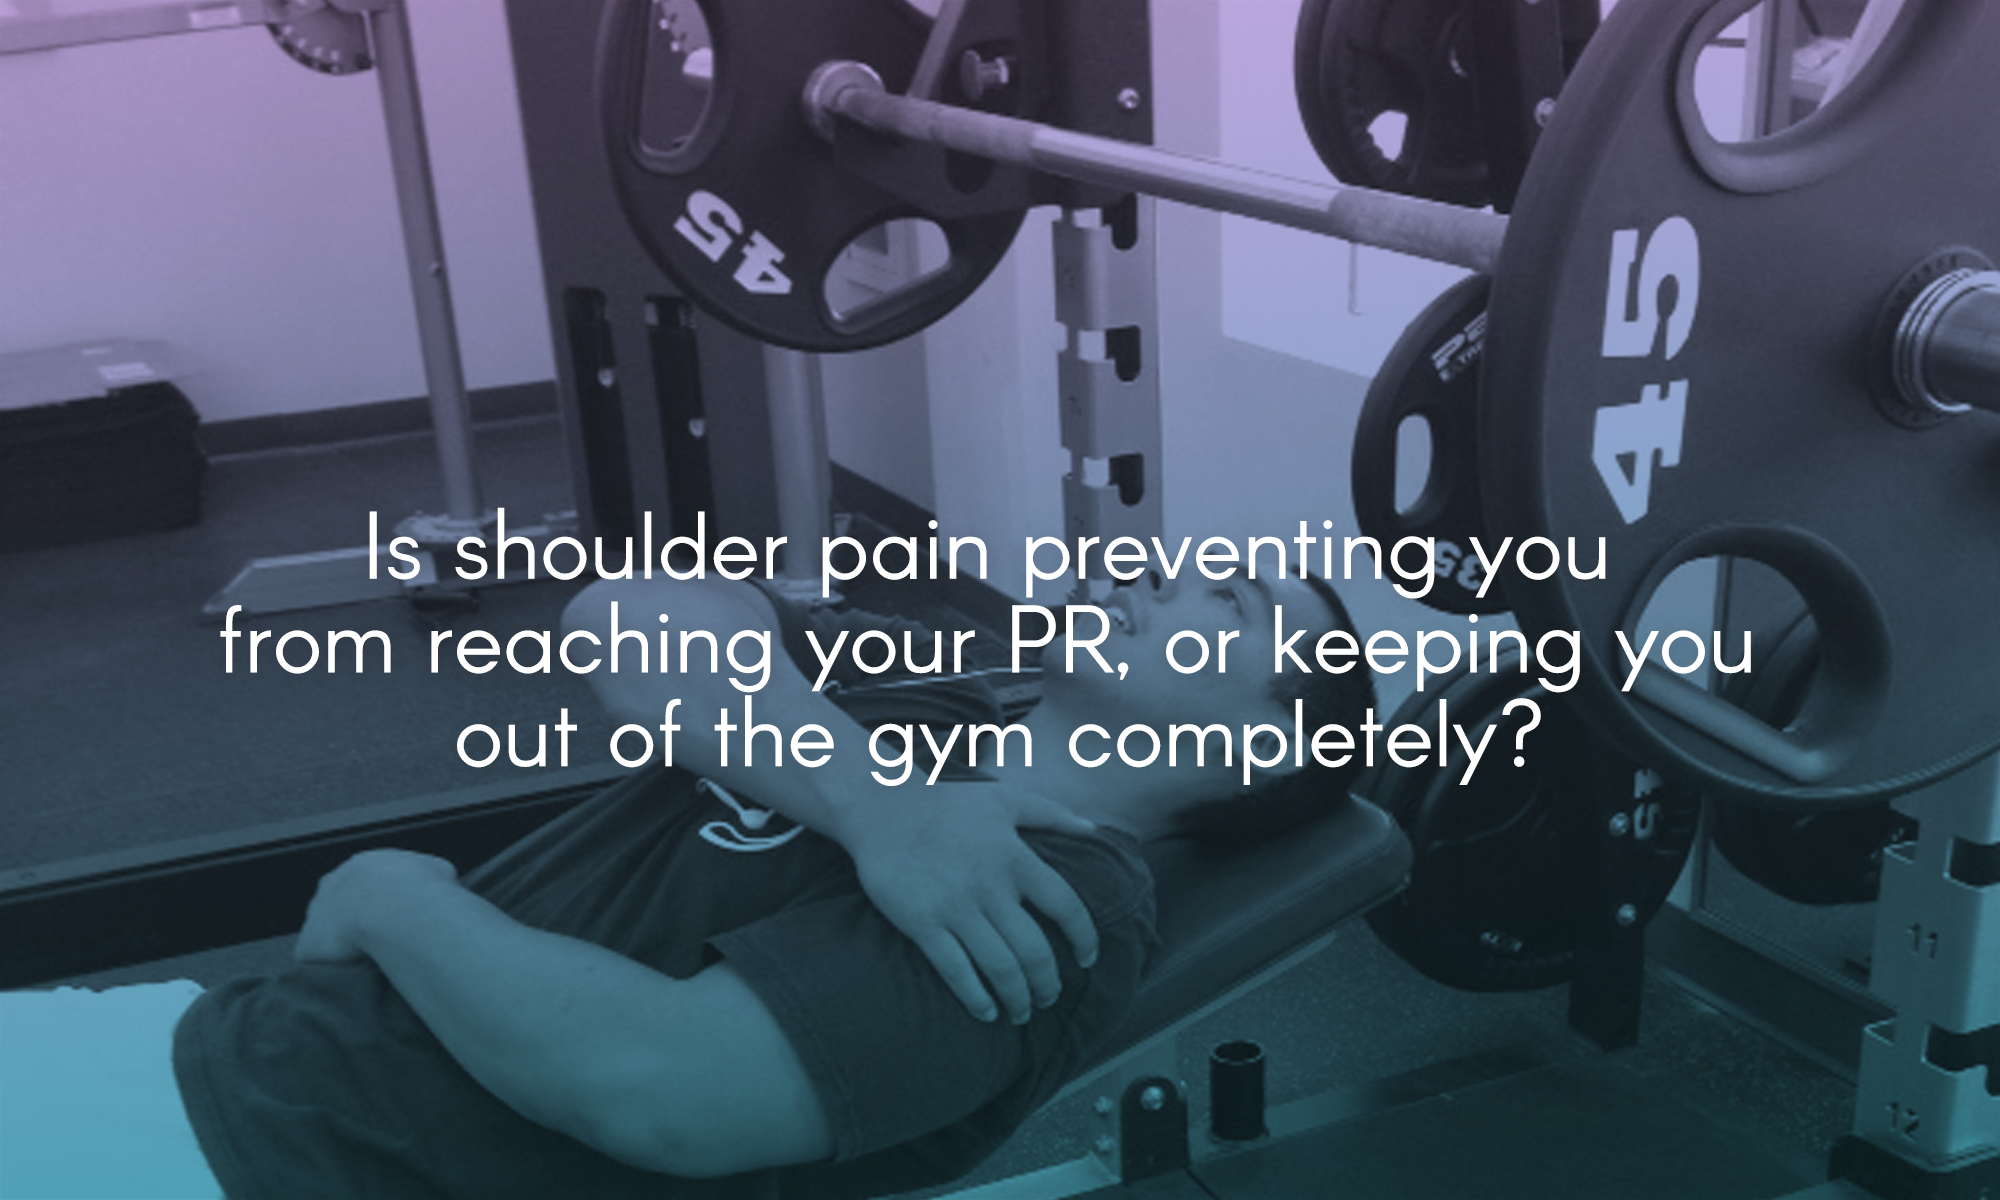  Is shoulder pain preventing you from reaching your PR, or keeping you out of the gym completely? 